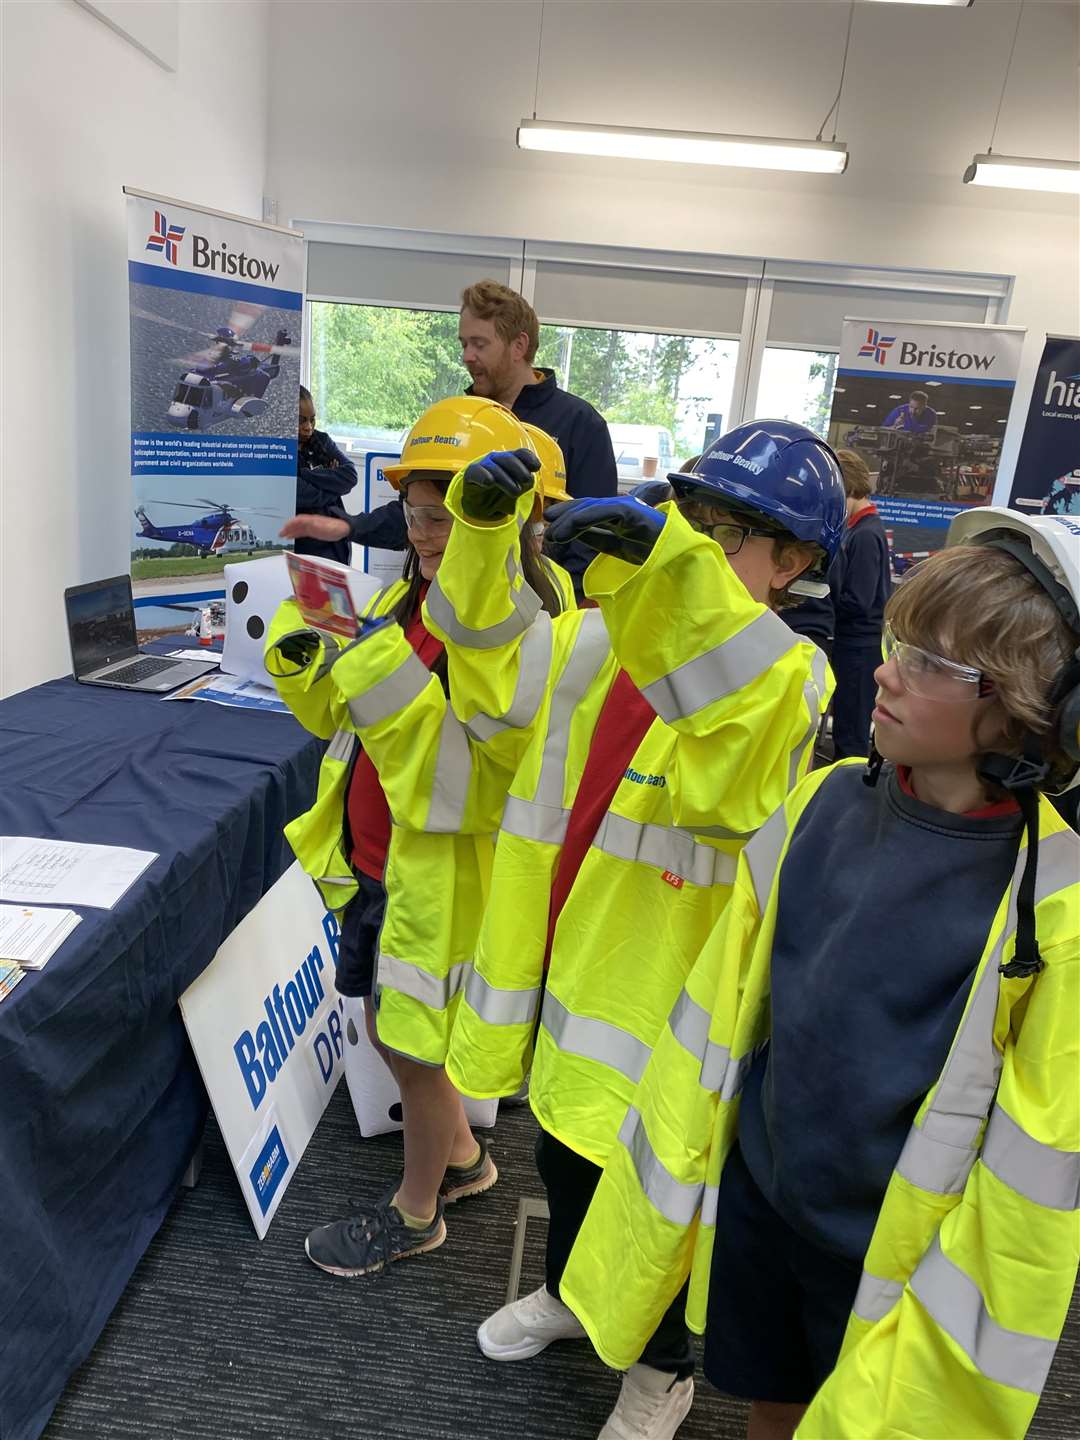 Youngsters taking part in SCDI’s Young Engineers and Science Clubs (YESC) Regional Celebration of STEM (Science, Technology, Engineering and Maths) at the Scottish School of Forestry.